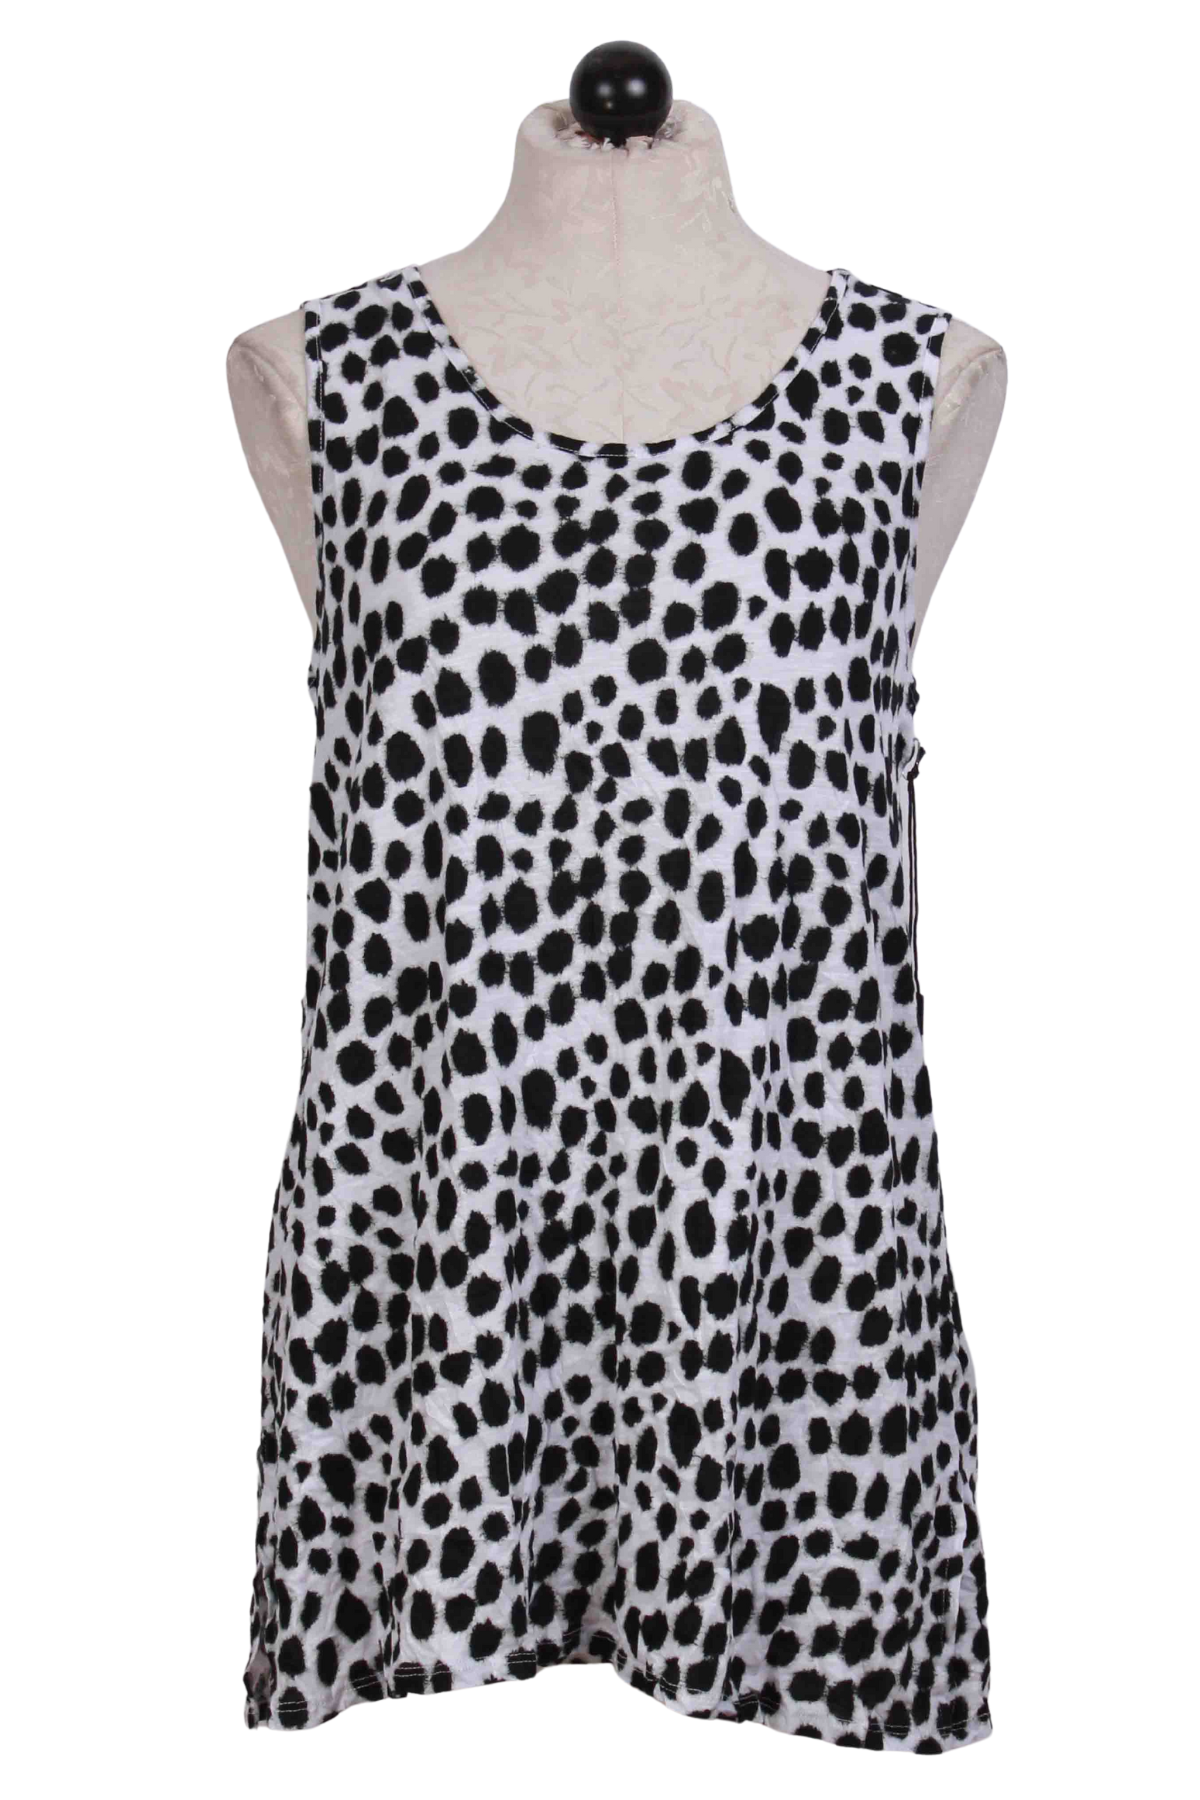 Black and White Dot Swing Tank by Liv by Habitat